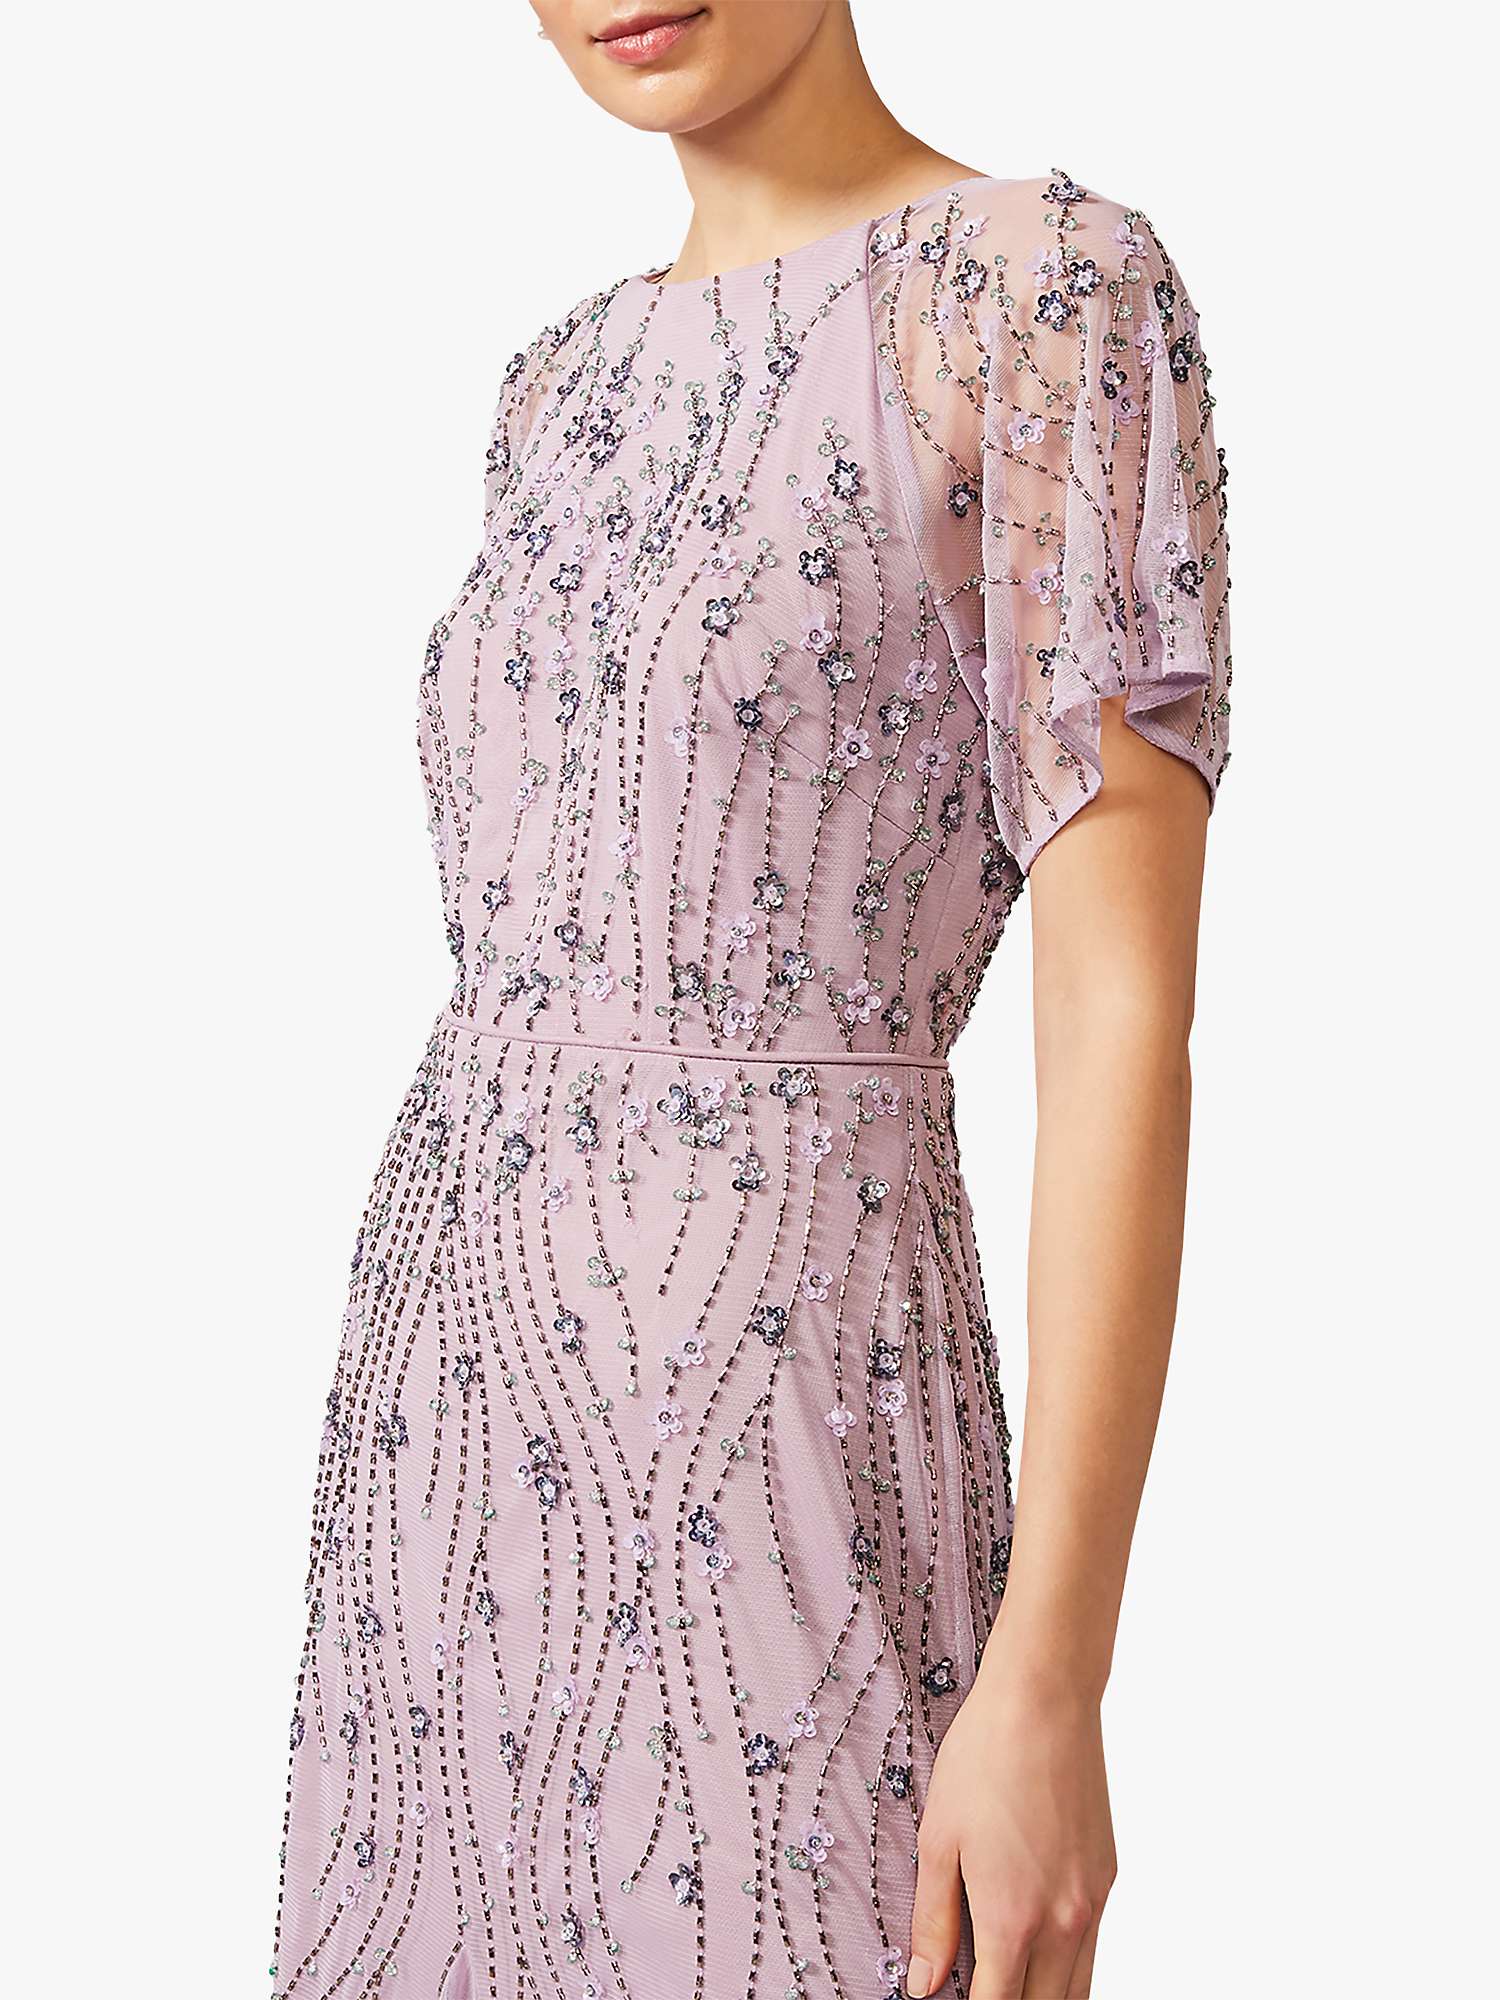 Buy Phase Eight Collection 8 Florisa Squinned Dress, Pale Lavender Online at johnlewis.com